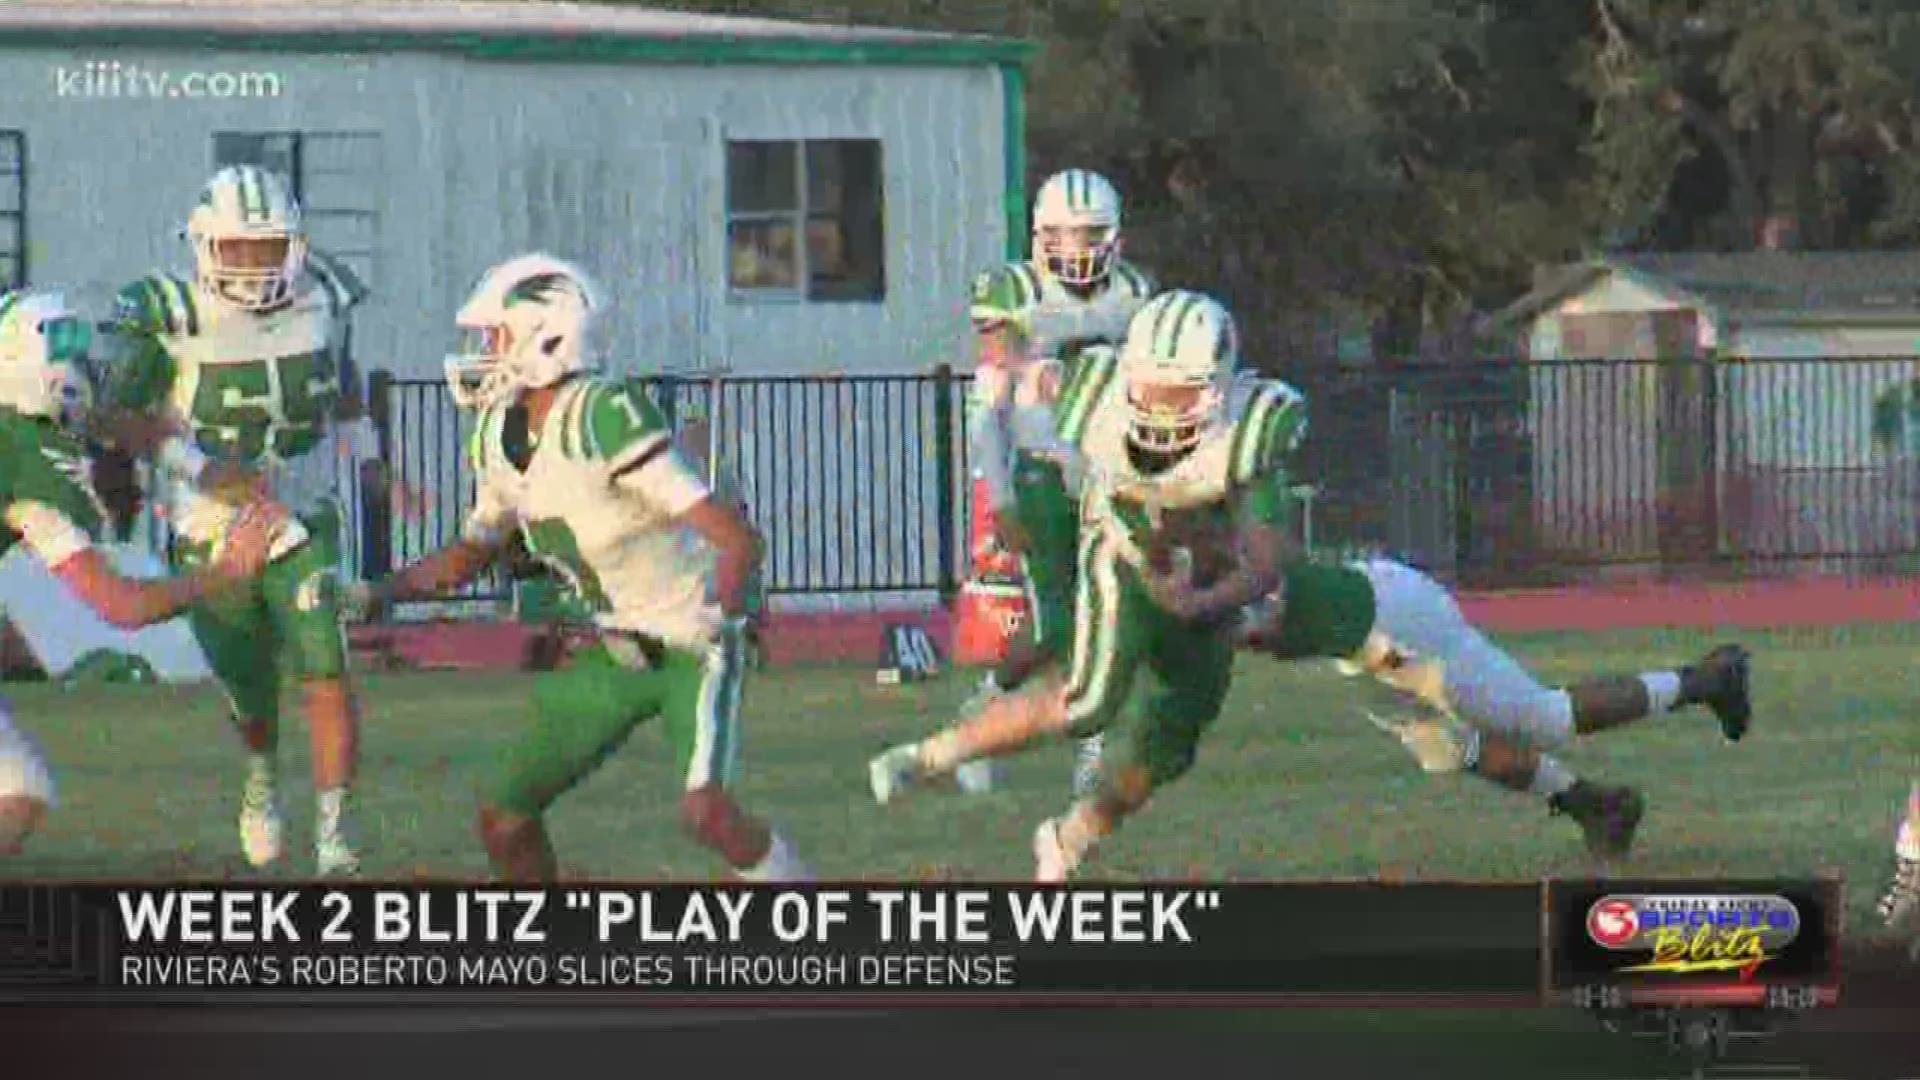 Friday Night Sports Blitz - Week 3 Part IV
Play of the Week rewarded to Riviera's Robert Mayo! Plus, we recap Thursday's games, the Blitz Rankings and take a look at the games next week.